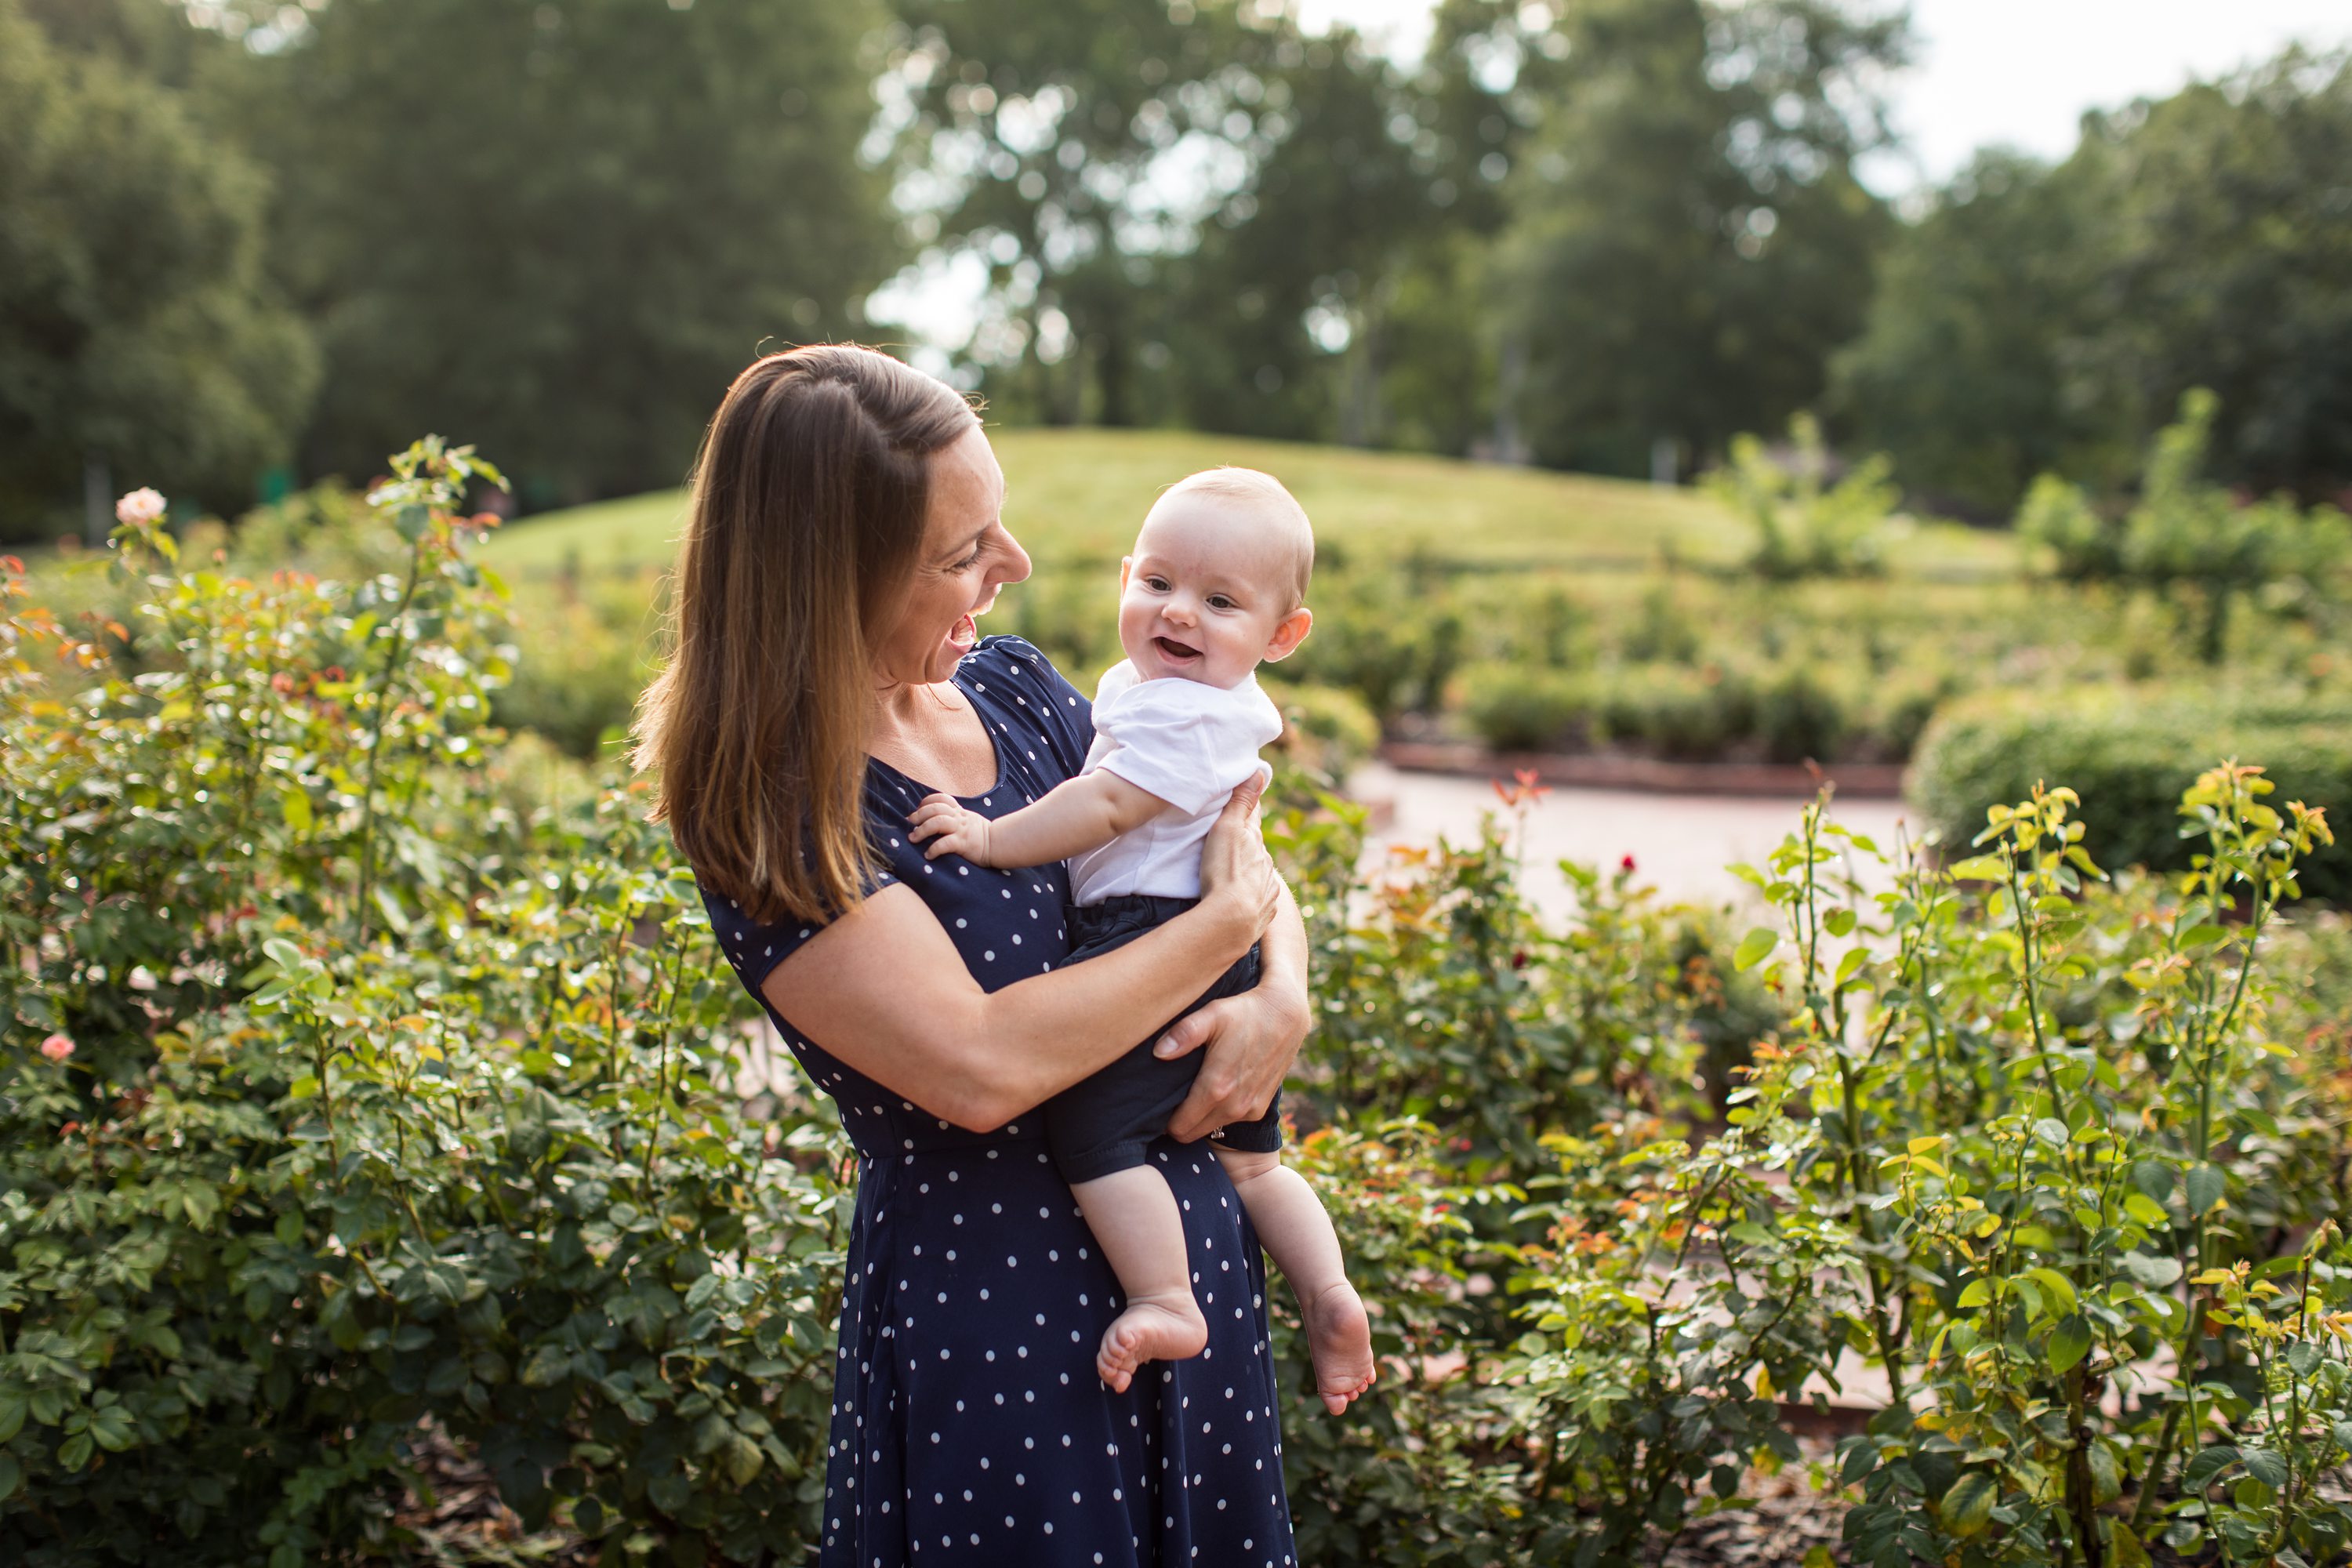 gene stroud rose garden park,mom and baby smiling,lifestyle baby photography